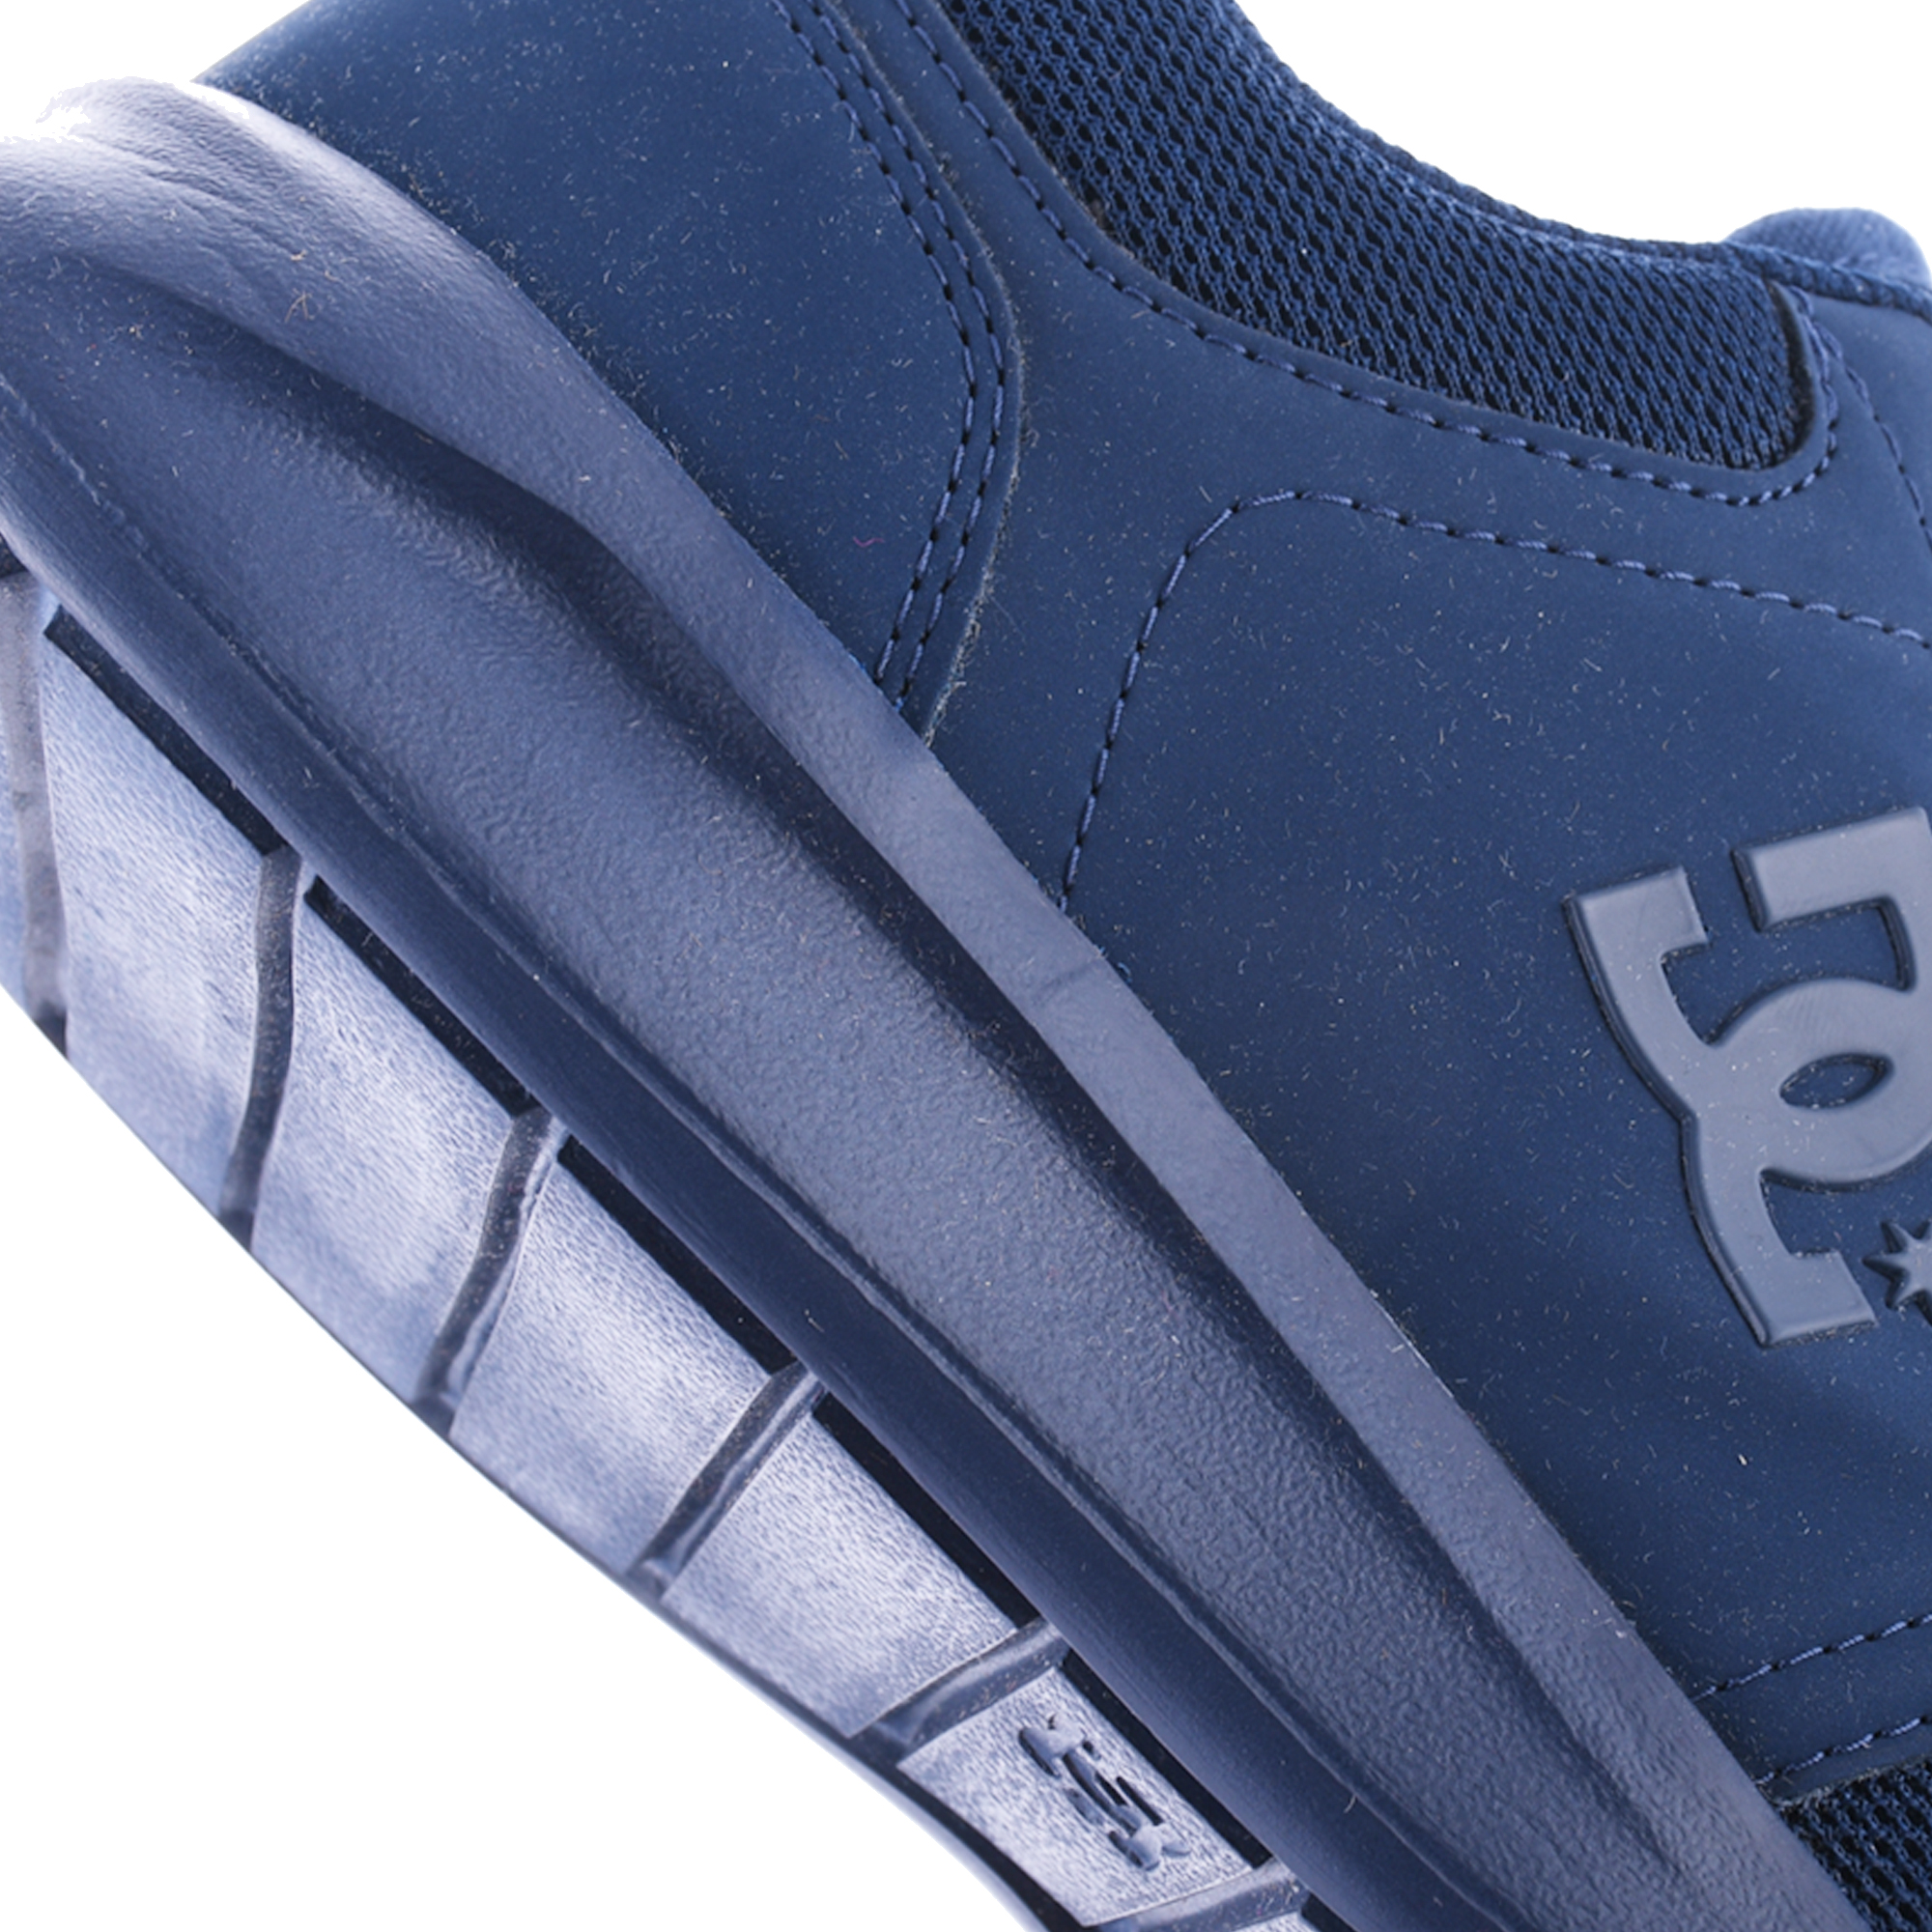 Tenis DC SHOES Hombre MIDWAY SN MX M SHOE NN1 Azul Navy Oscuro